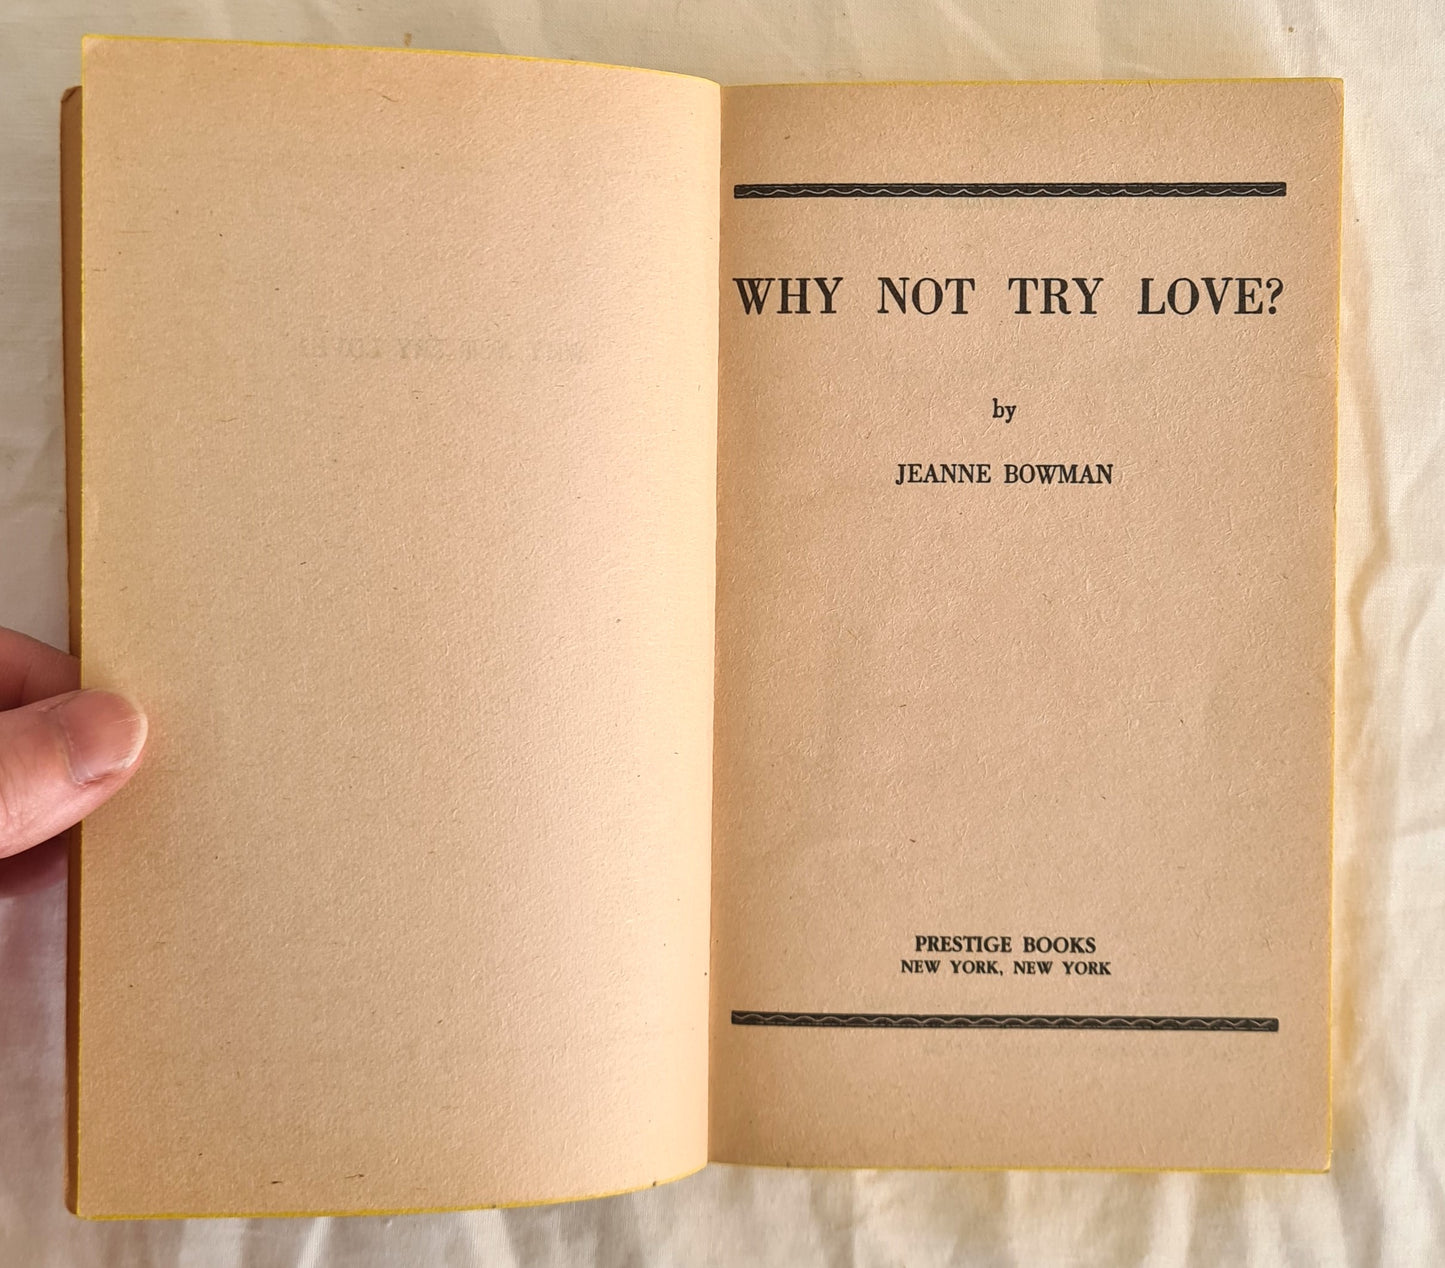 Why Not Try Love? by Jeanne Bowman